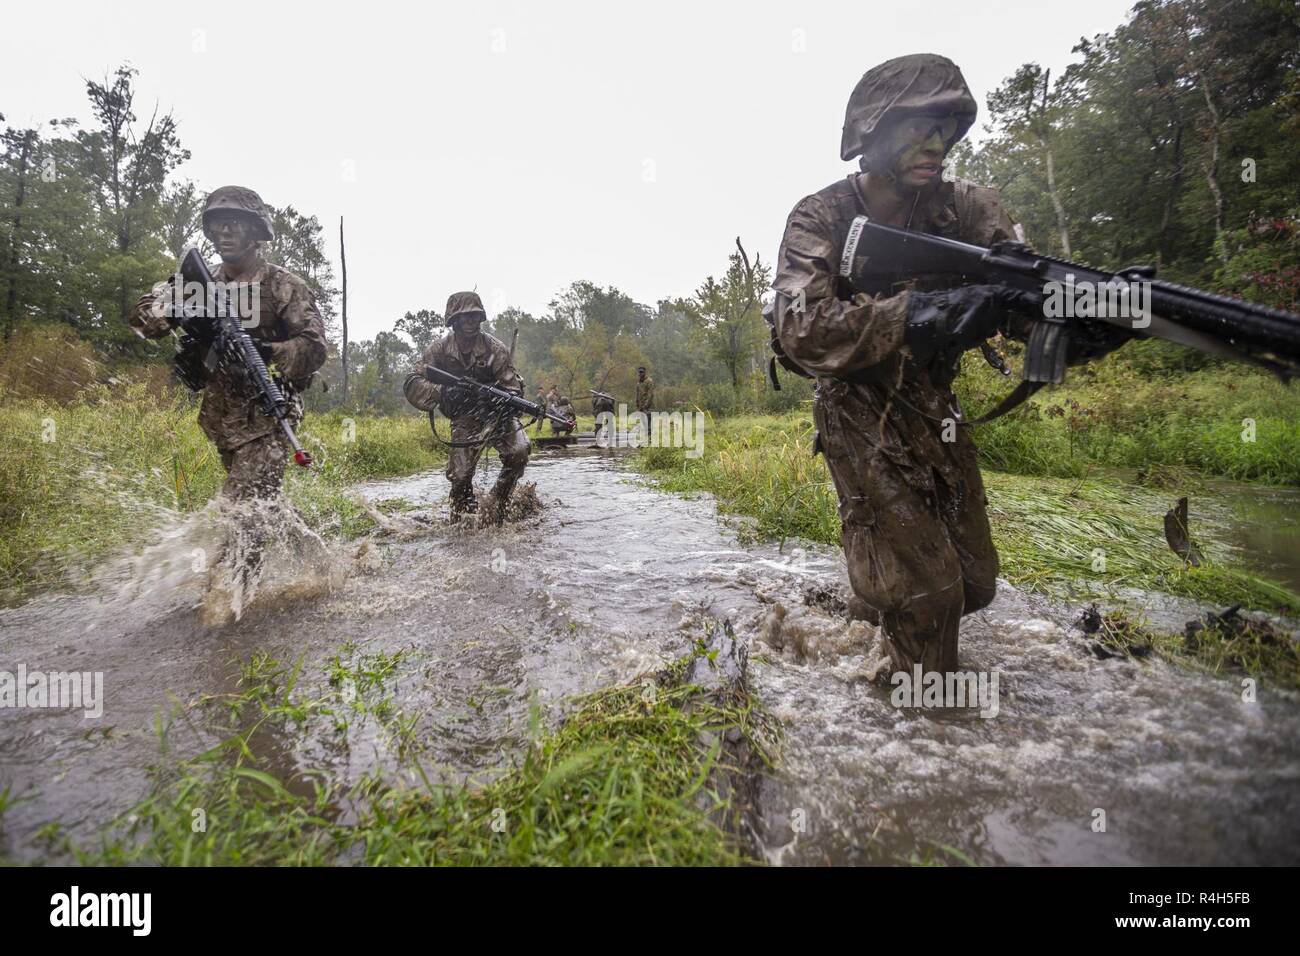 U.S. Marine candidates of the Officer Candidate School, Delta company, participate in the combat course at Quantico, Va., Sep 24, 2018. This training is conducted to prepare candidates for future mental and physical challenges. Stock Photo